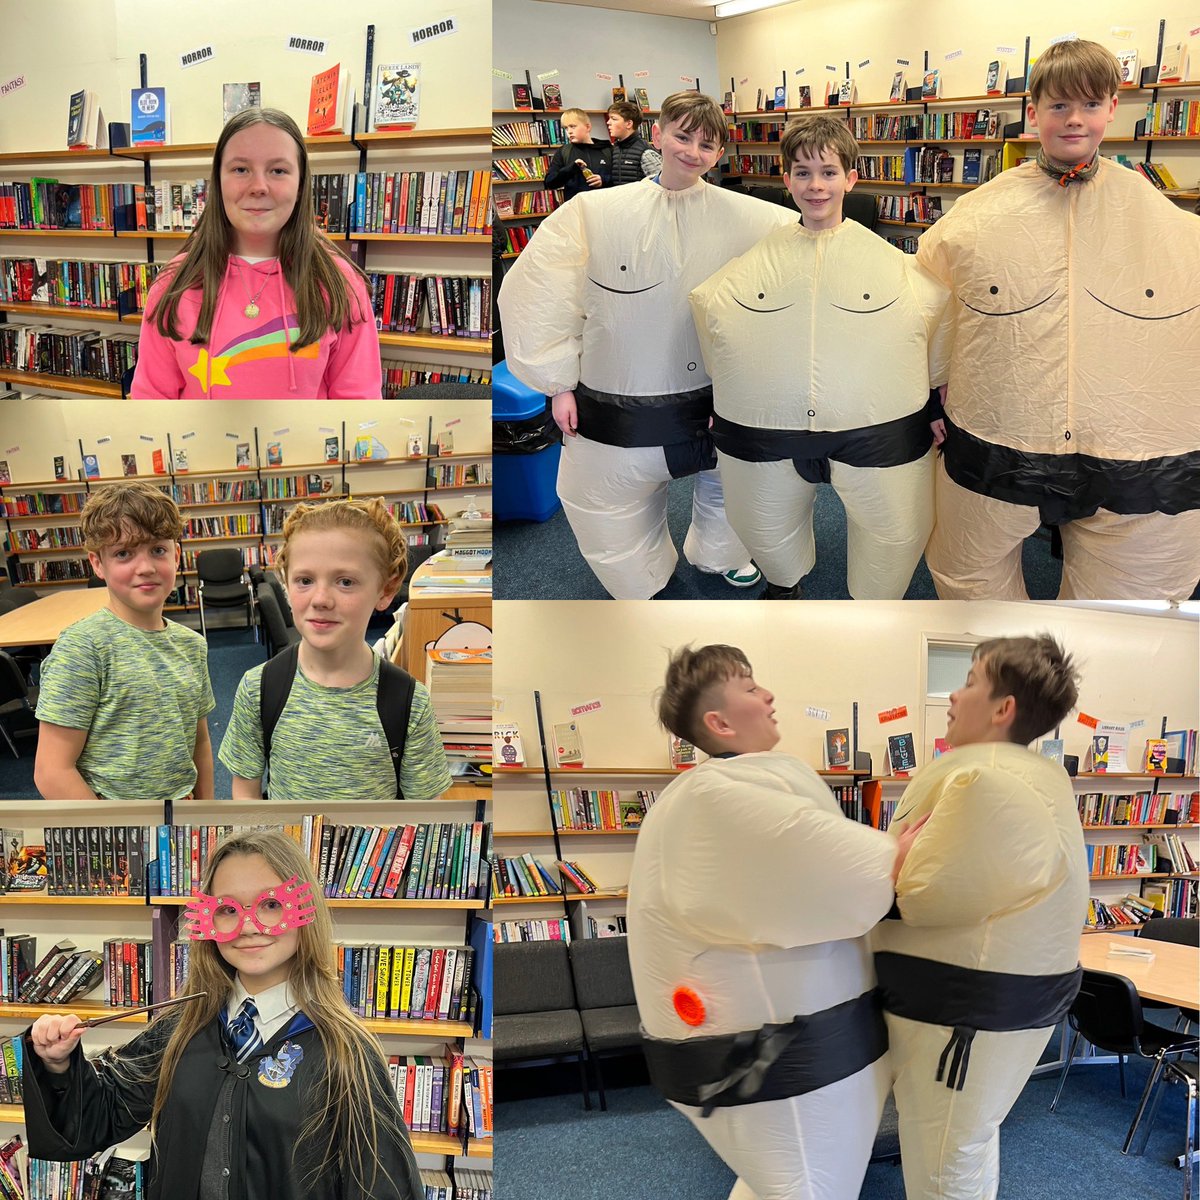 Yesterday was our Big Book Character day and both staff and students got involved. We had wizards, monsters, farm animals, inspectors. 7 dwarfs and even some sumo wrestlers. #readingforpleasure